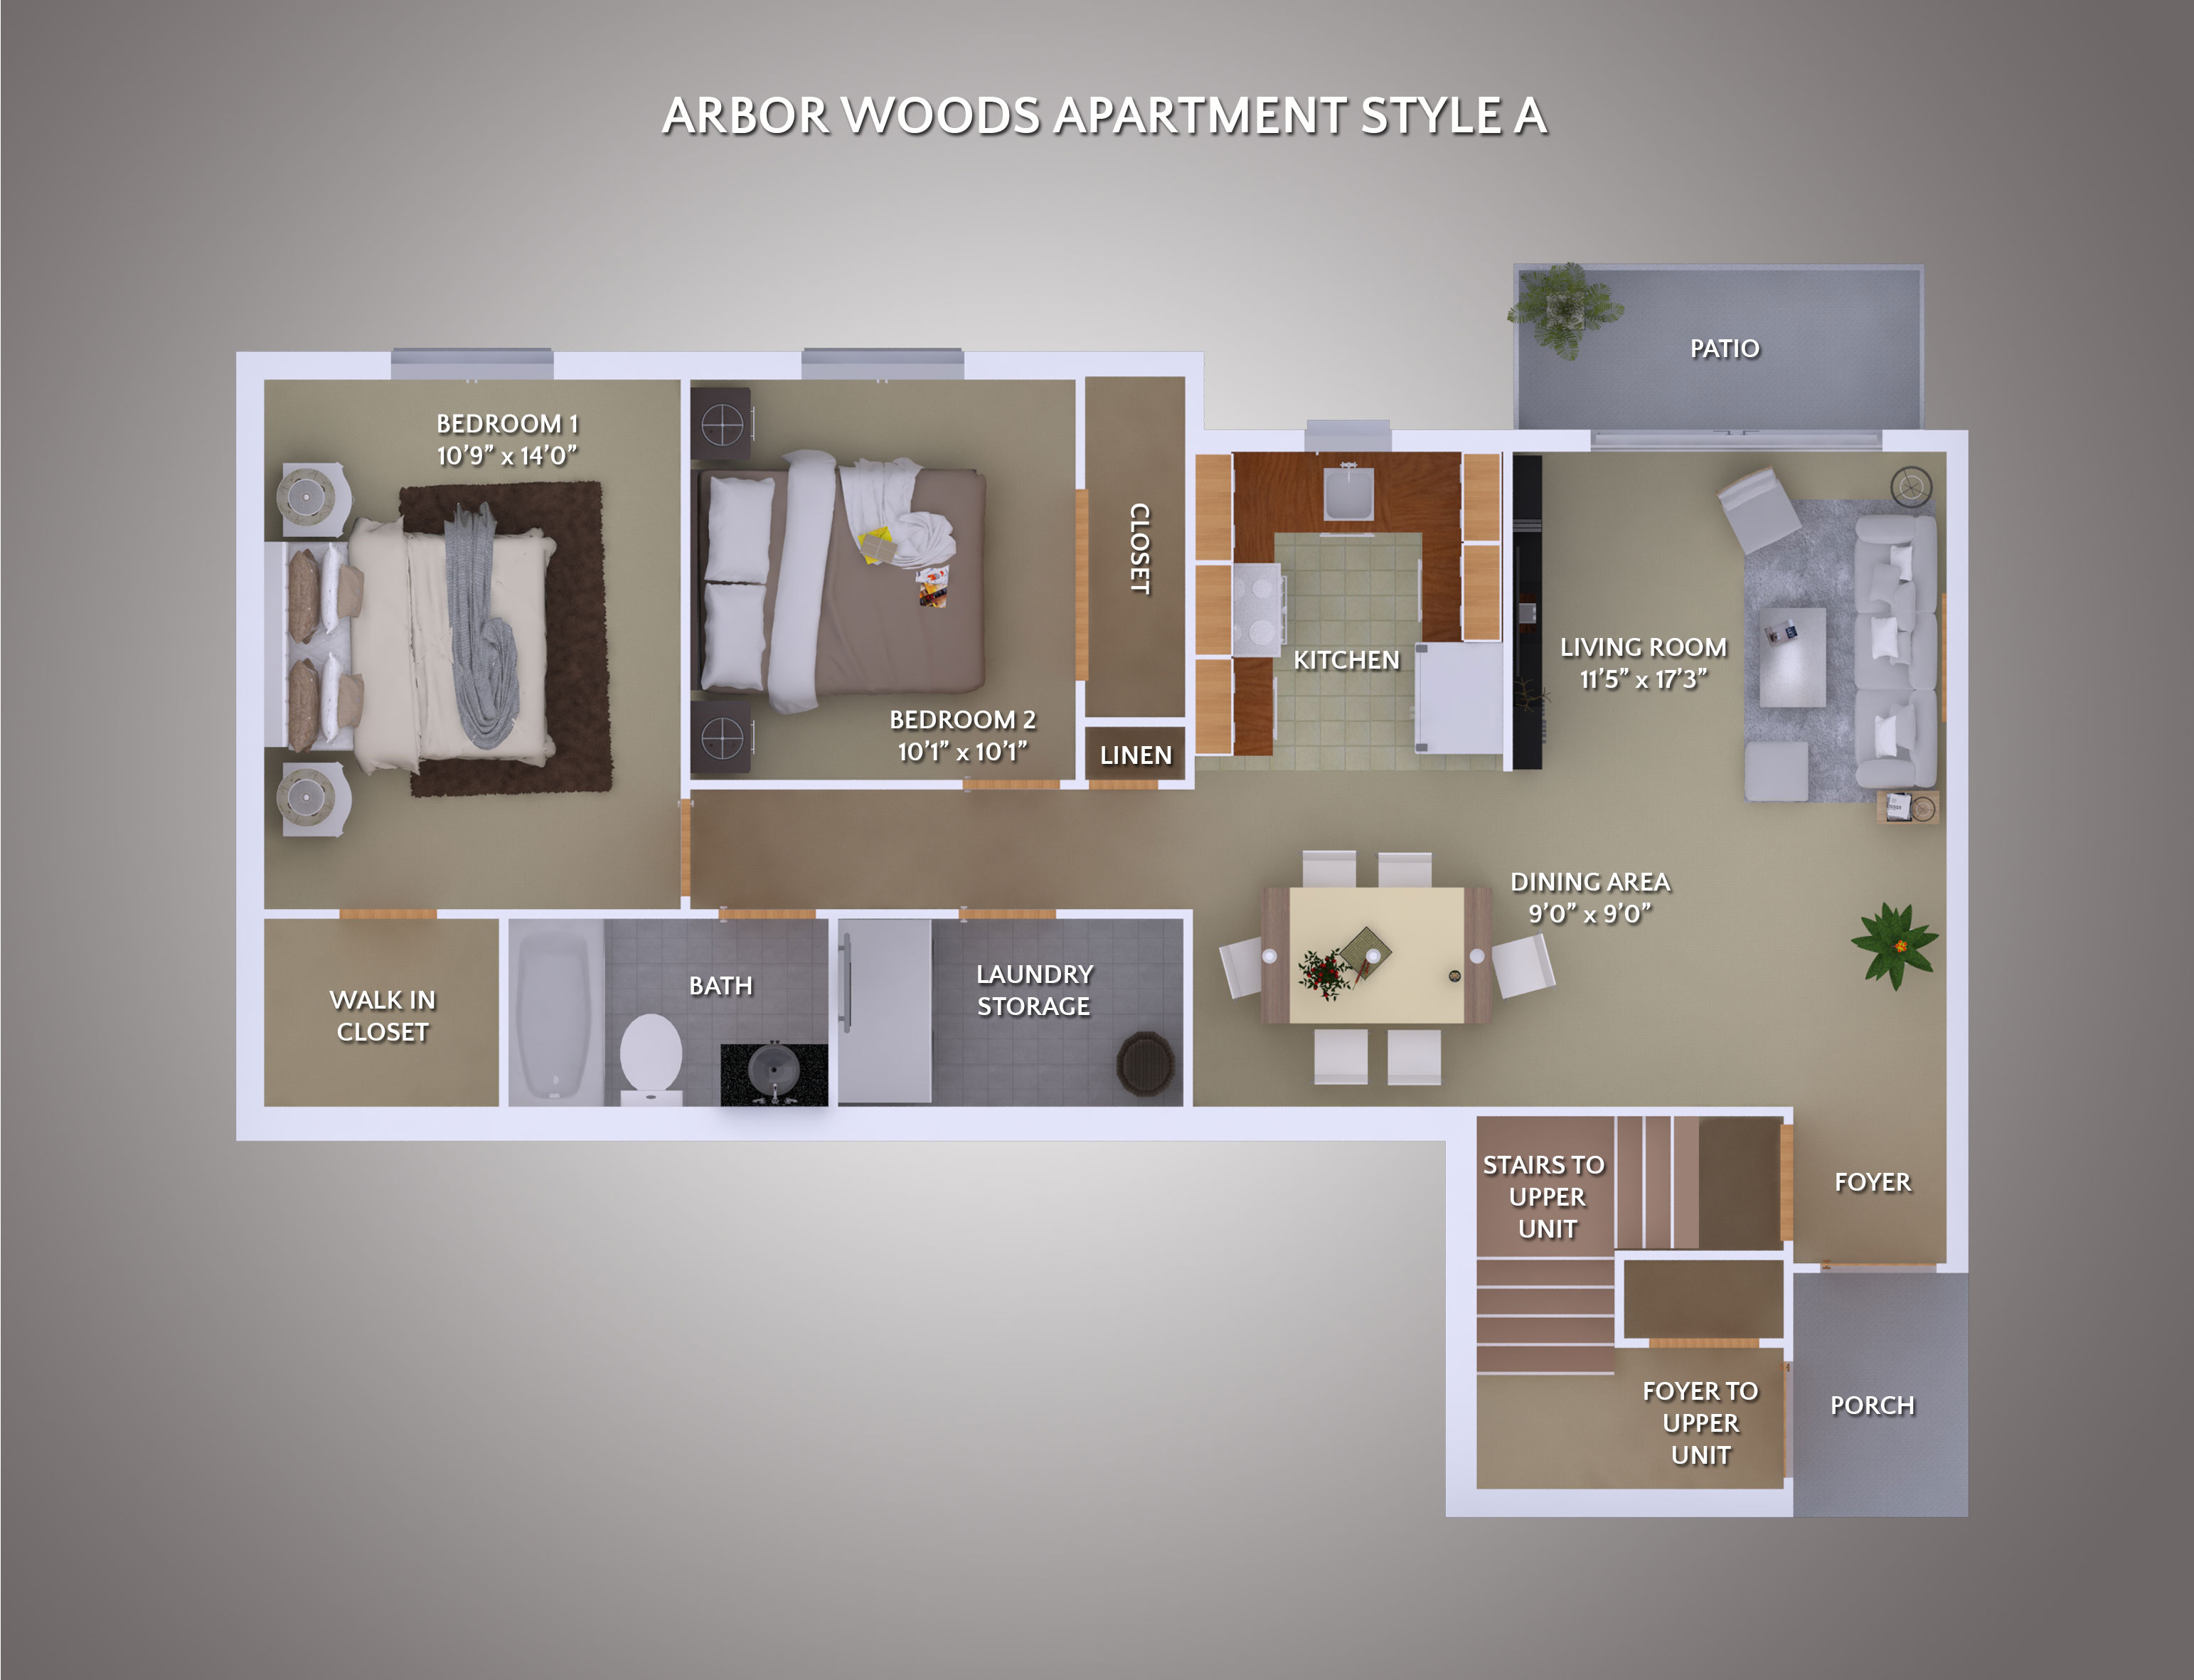 Apartment Style A floor plan